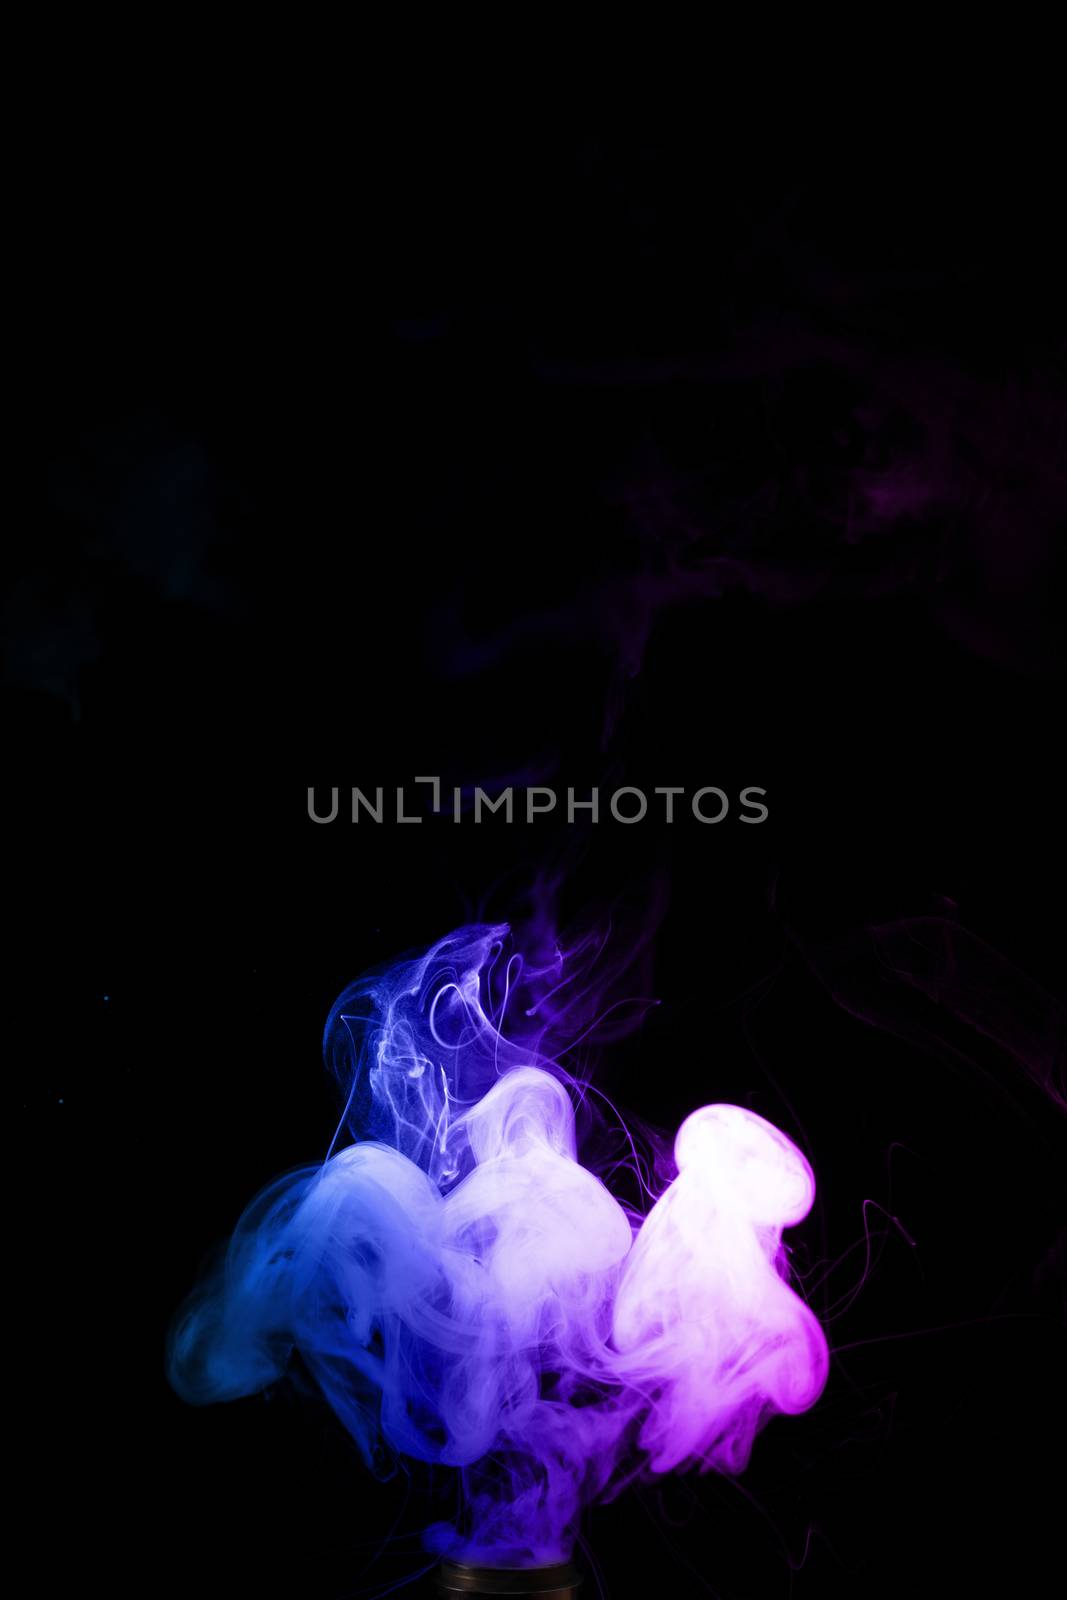 Colored clouds of vape smoke. A lot of colour and glicerine clouds, red and blue colours. Stock photo isolated on black background with boling spray of vaping liquid. Vape culture and no smoking movement.